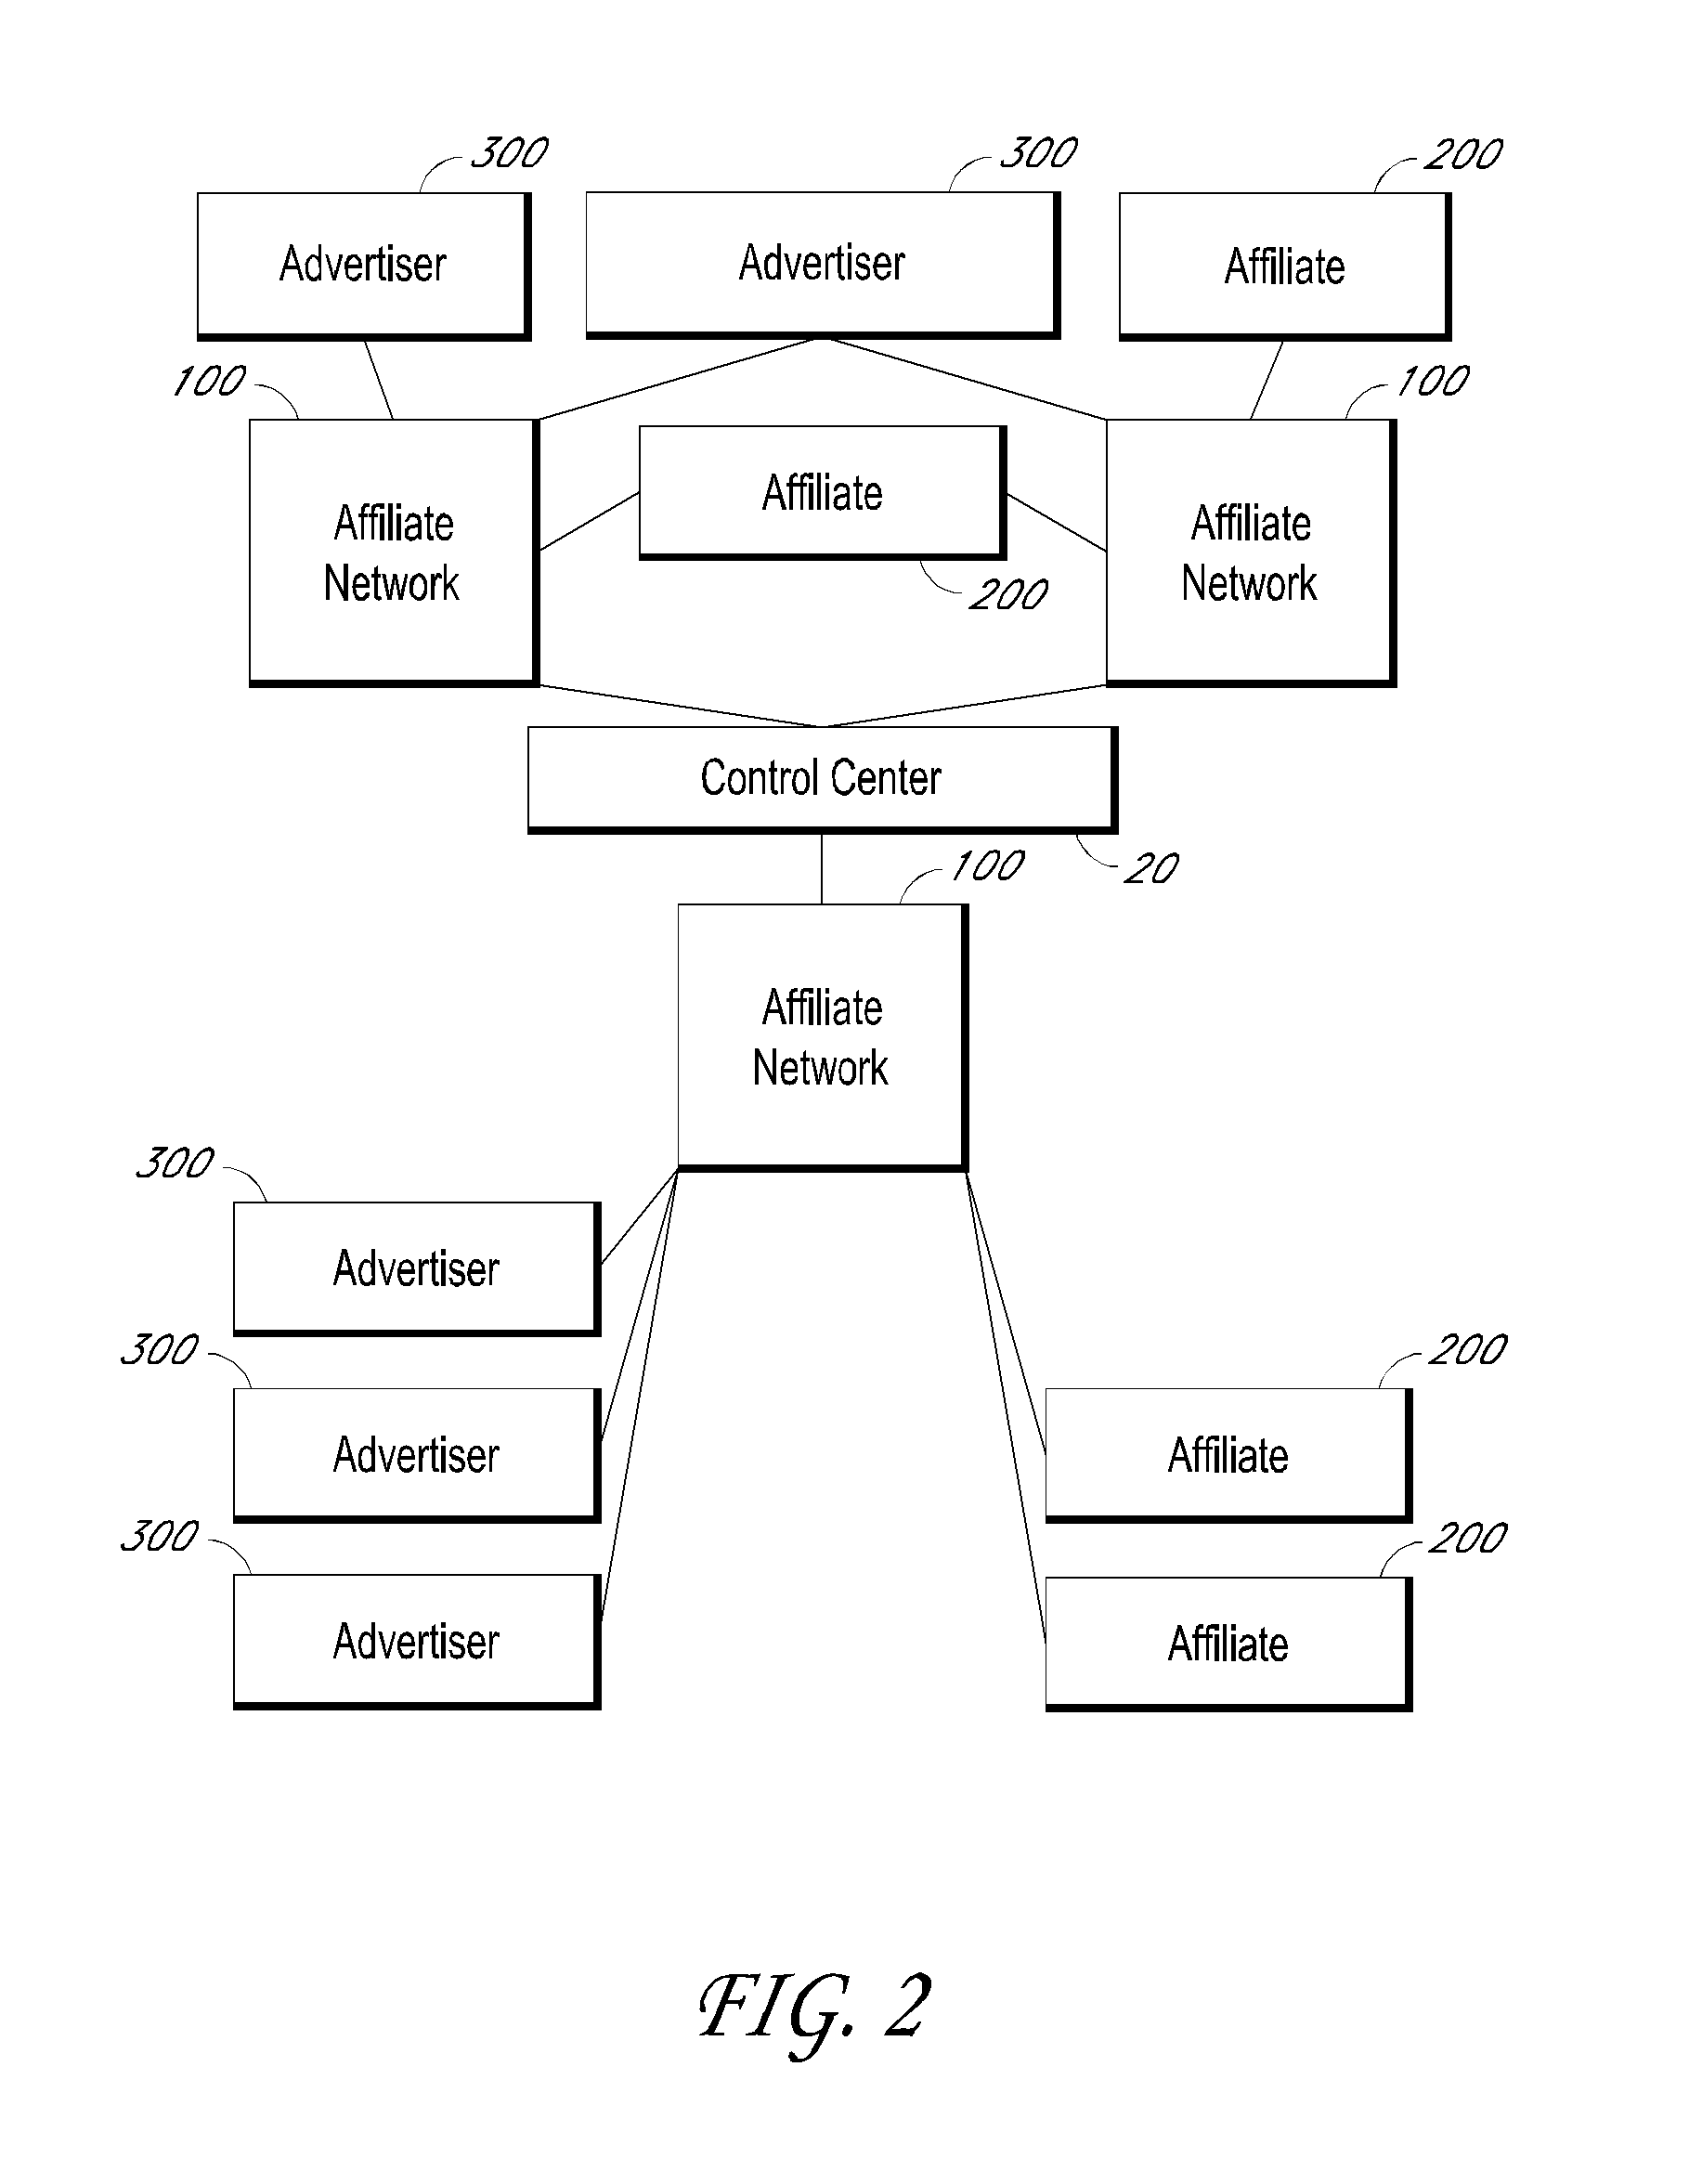 Methods and systems for data transfer and campaign management